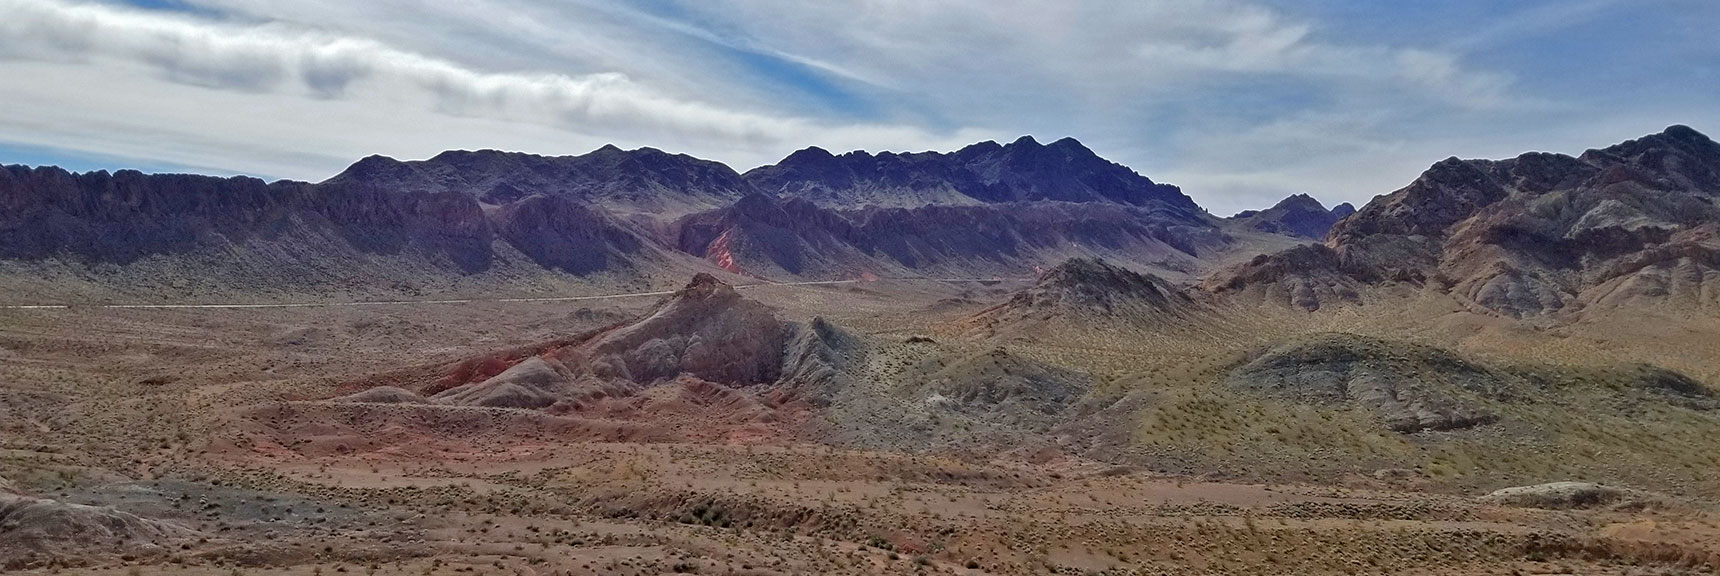 Black Mountains, Jimbalnan Wilderness Area from About Mile 32 On Northshore Road in Lake Mead National Park, Nevada